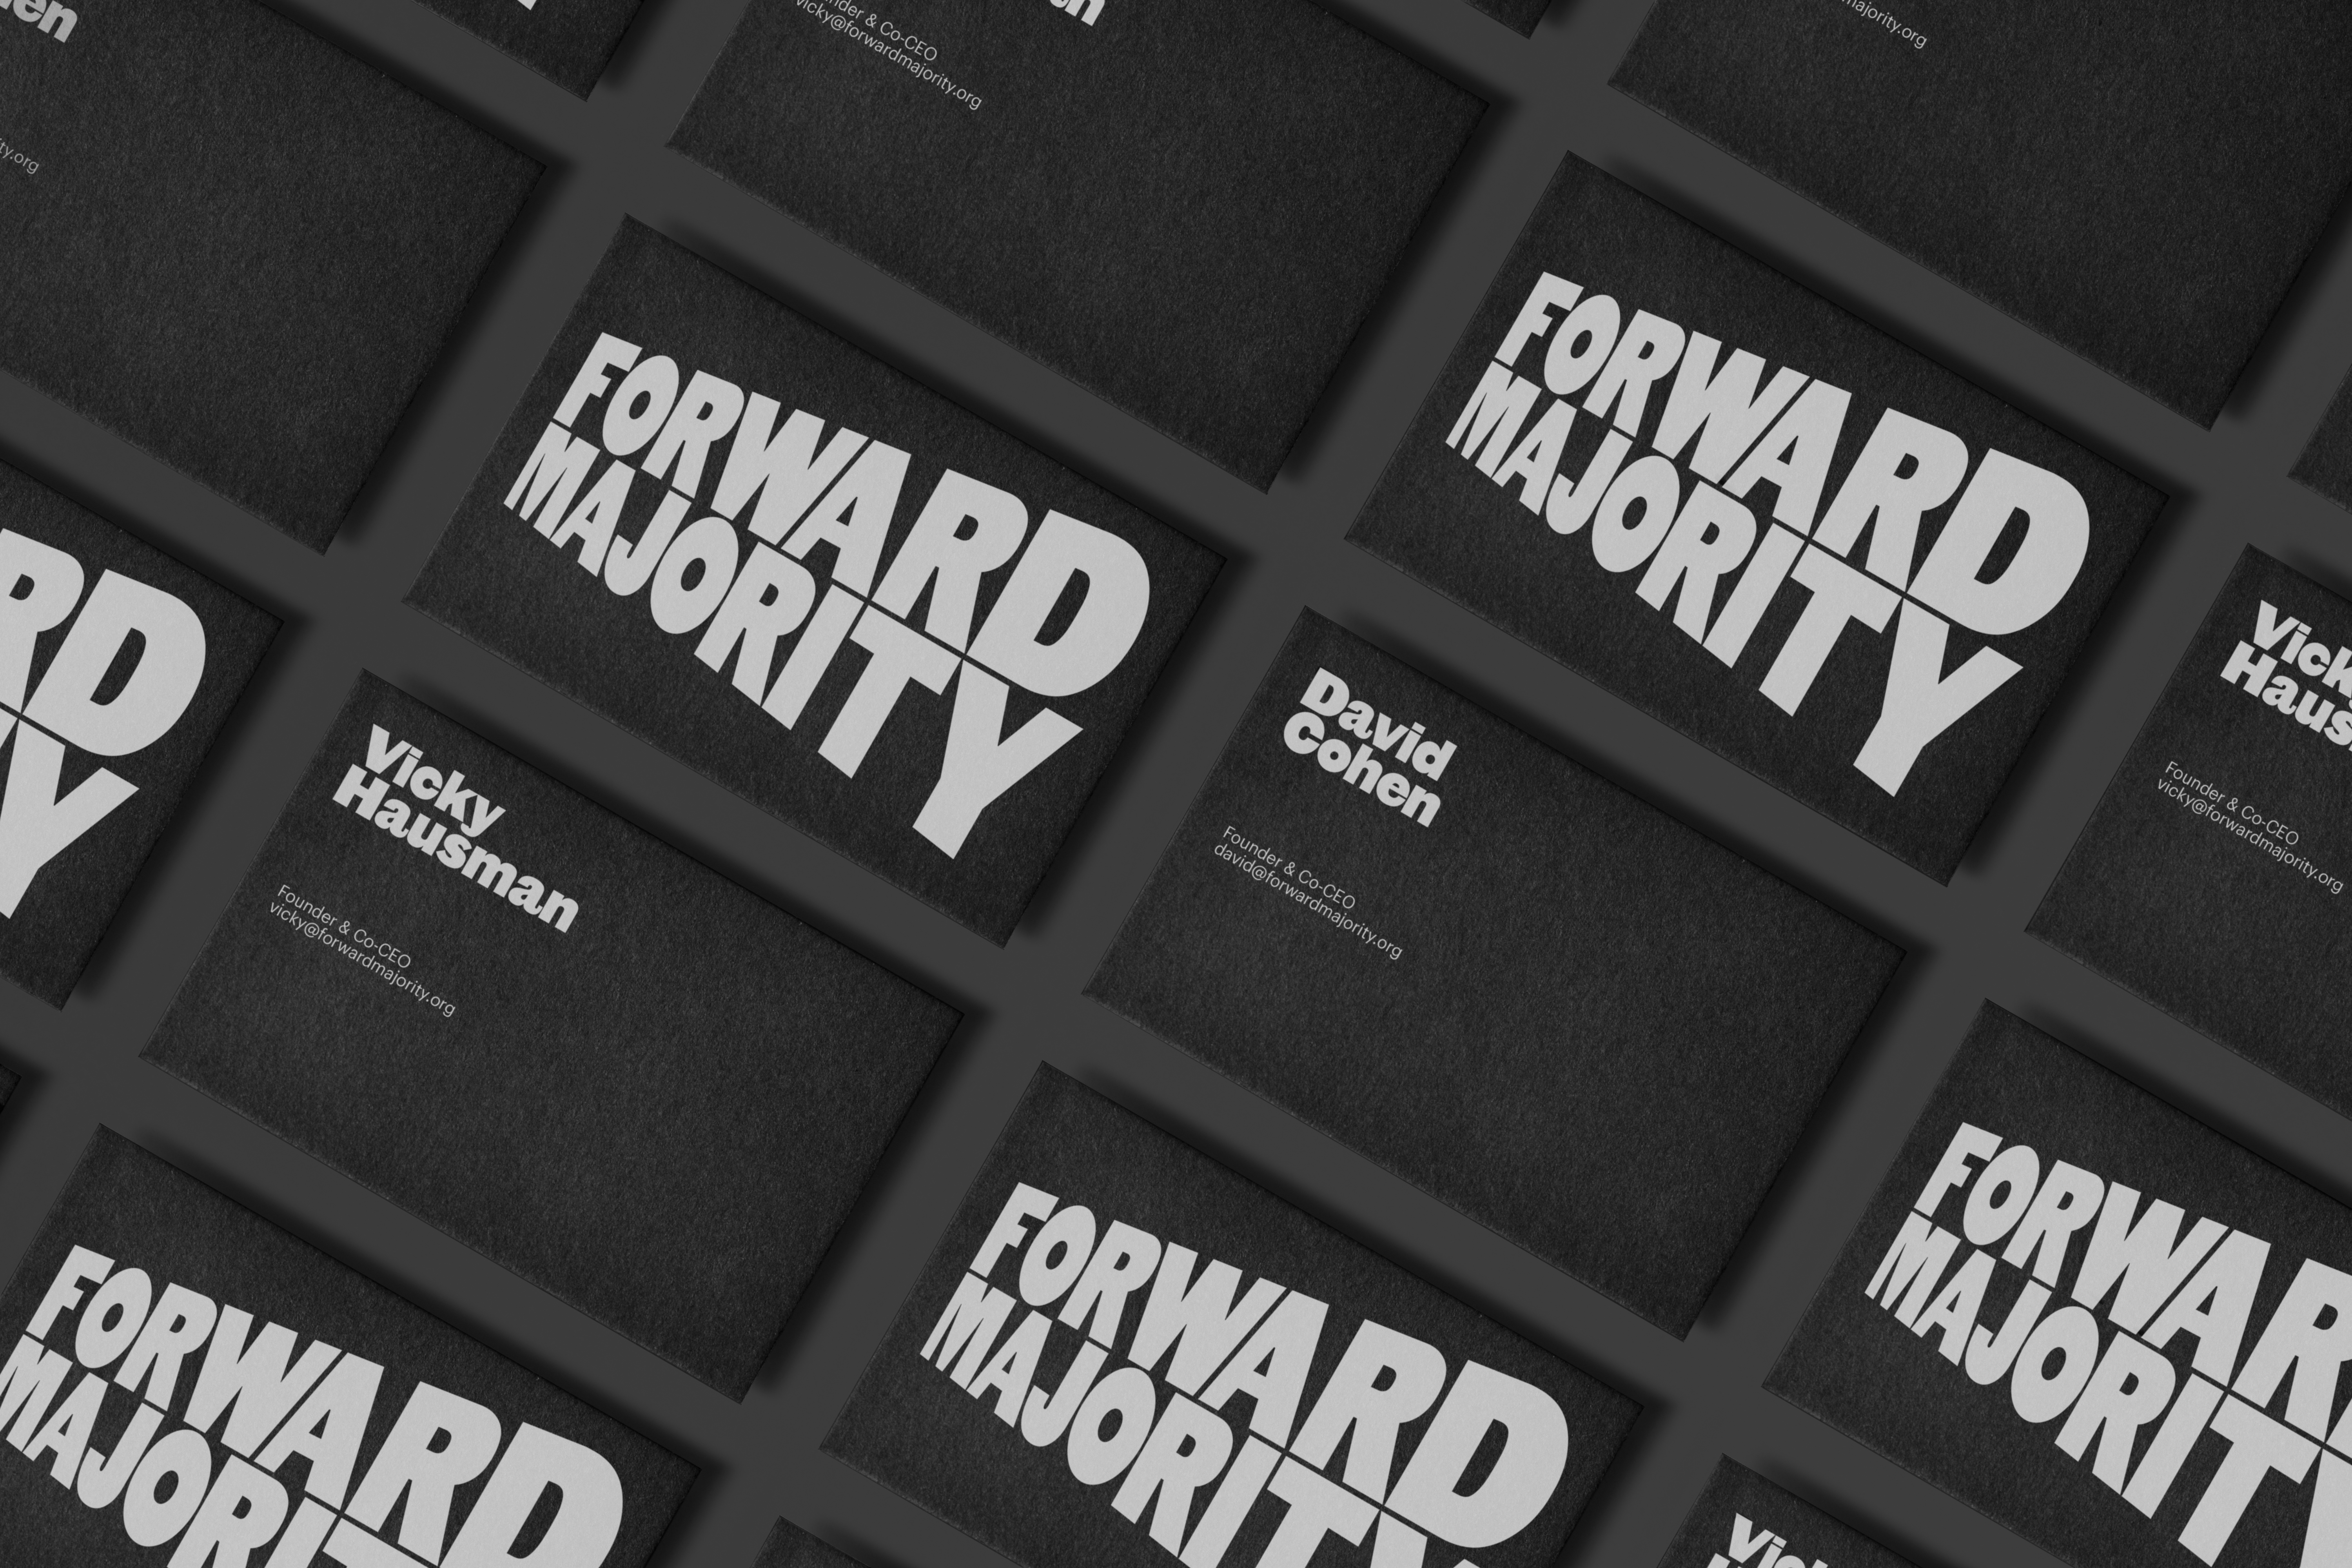 Visual identity and business cards for political action committee Forward Majority designed by New York-based studio Order